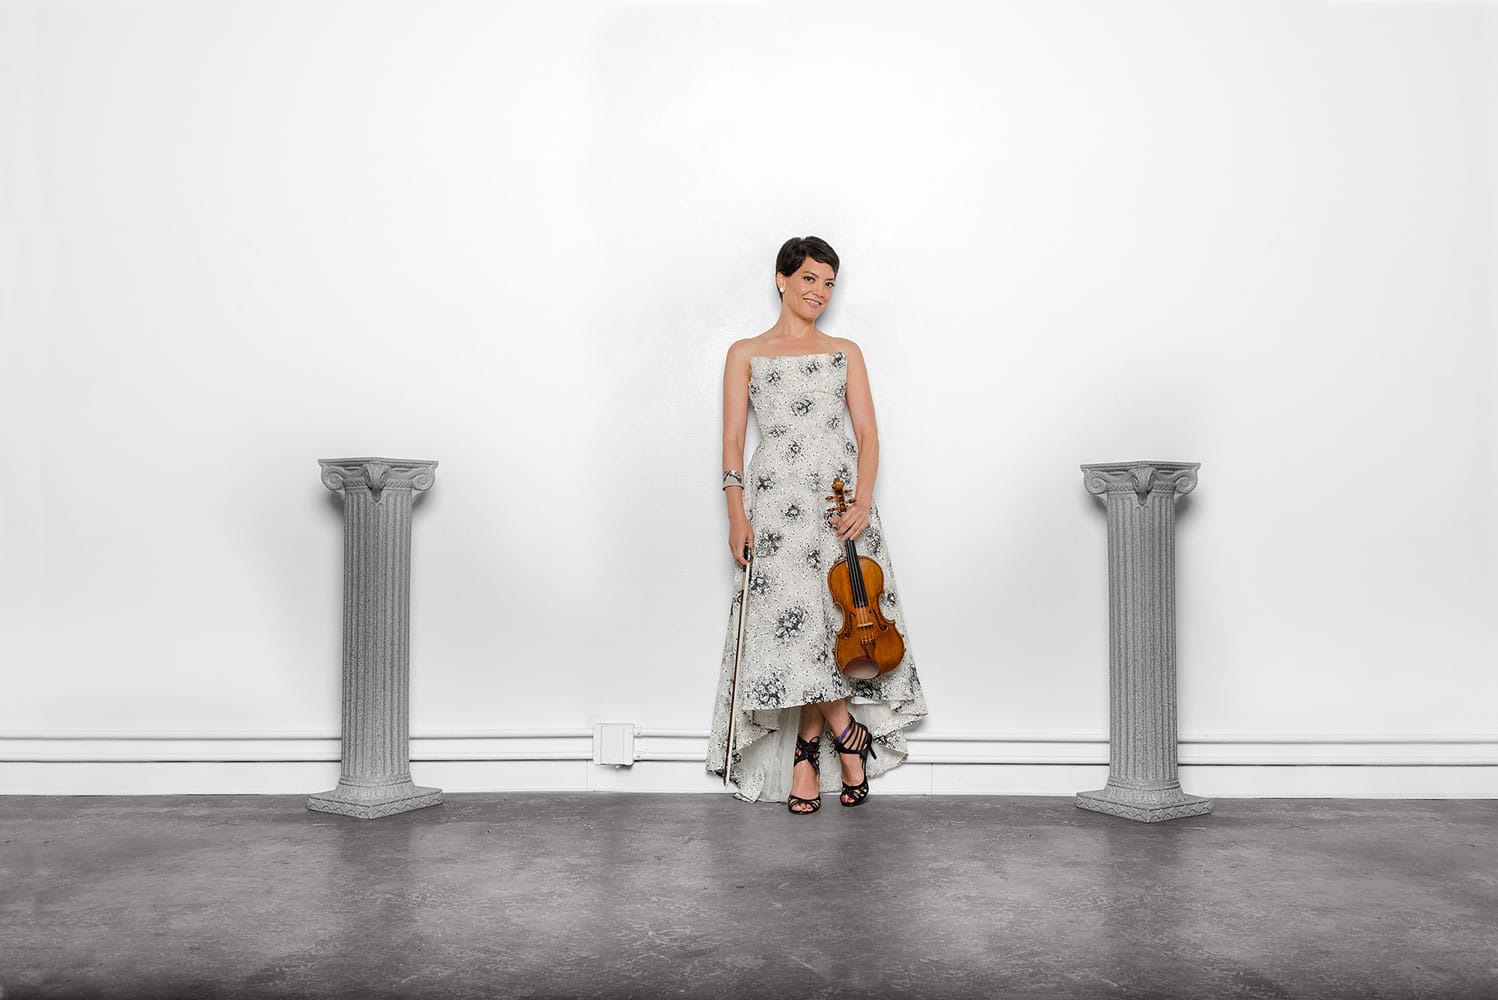 Violist Anne Akiko Meyers will perform as the Vancouver Symphony Orchestra opens its 2015-16 season with concerts Saturday and Sunday.